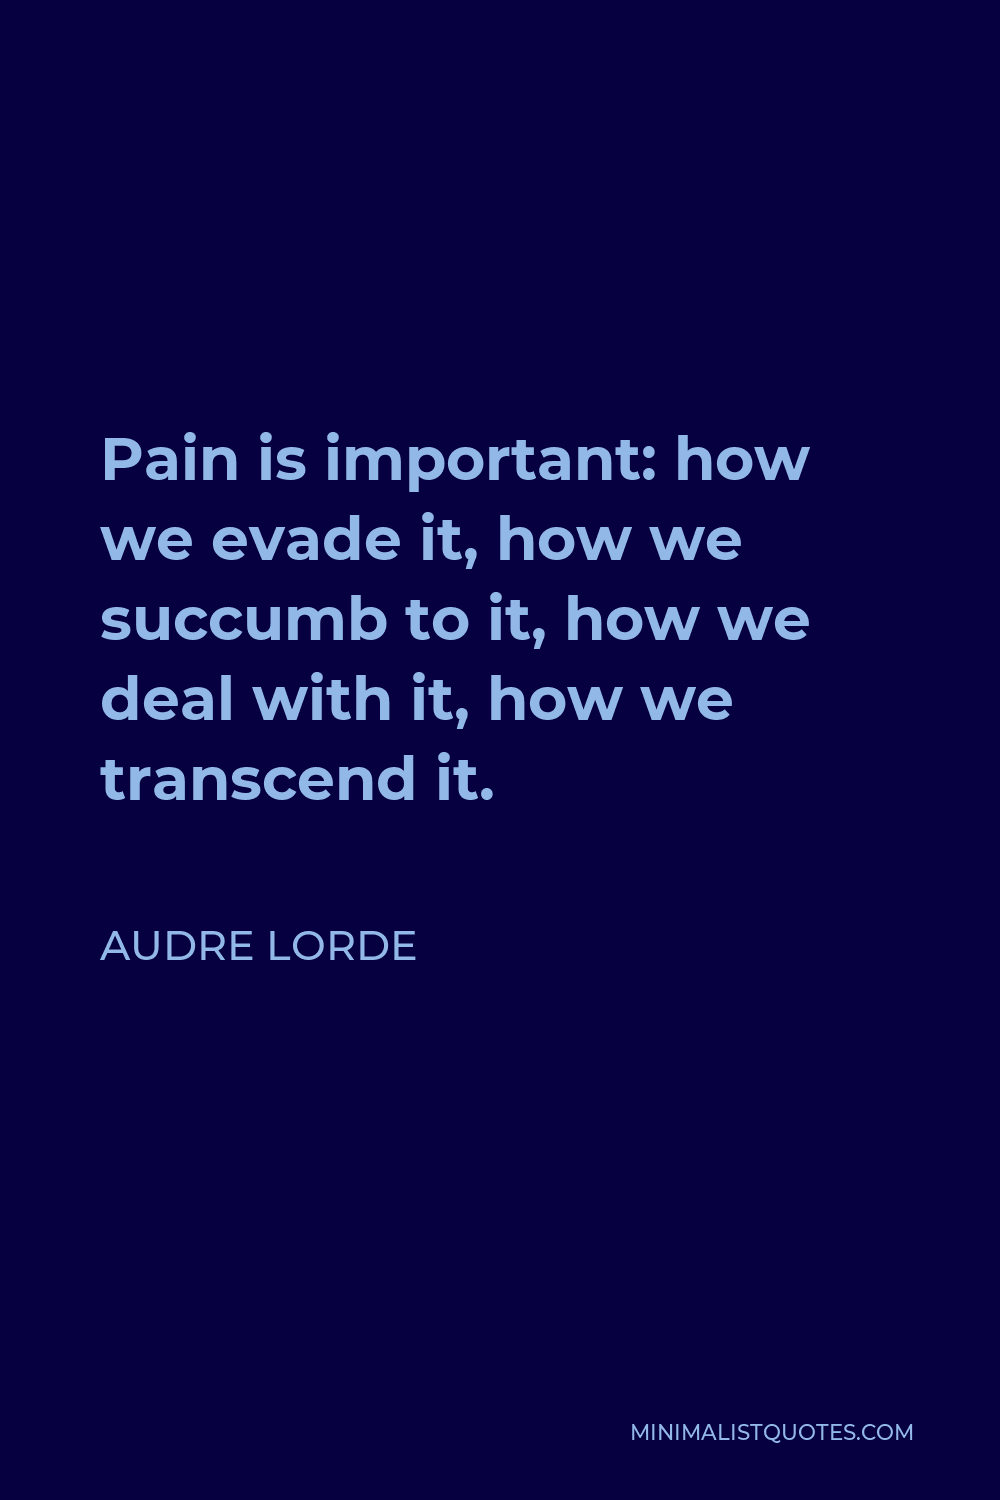 Audre Lorde Quote - Pain is important: how we evade it, how we succumb to it, how we deal with it, how we transcend it.